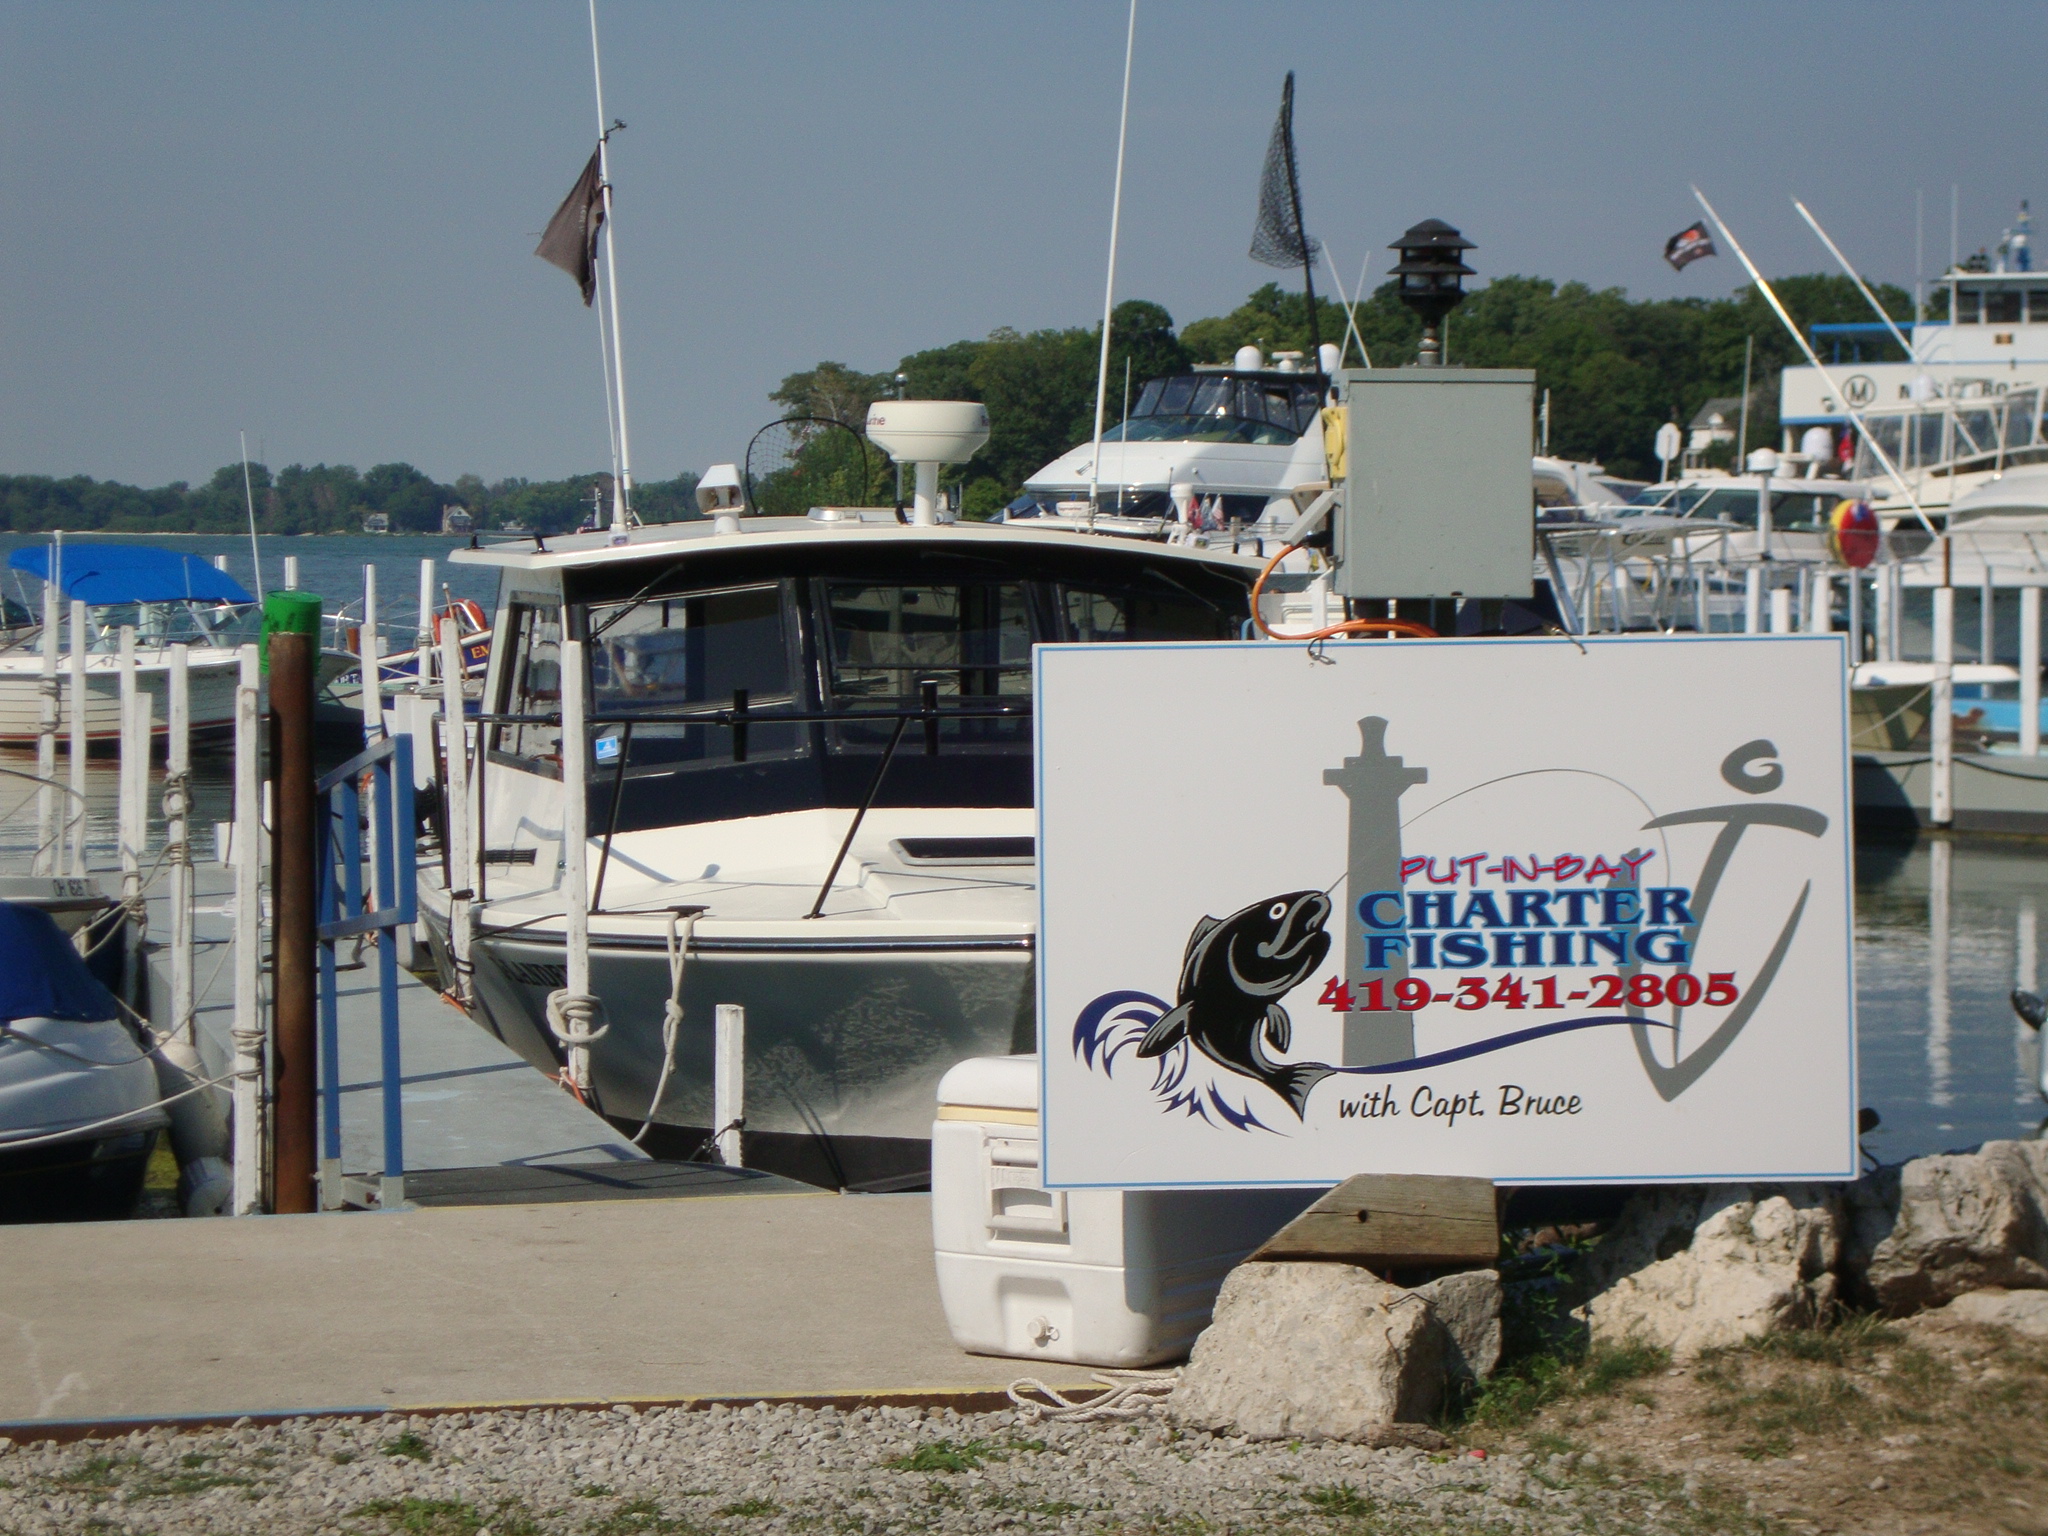 Put-in-Bay Charter Fishing Service